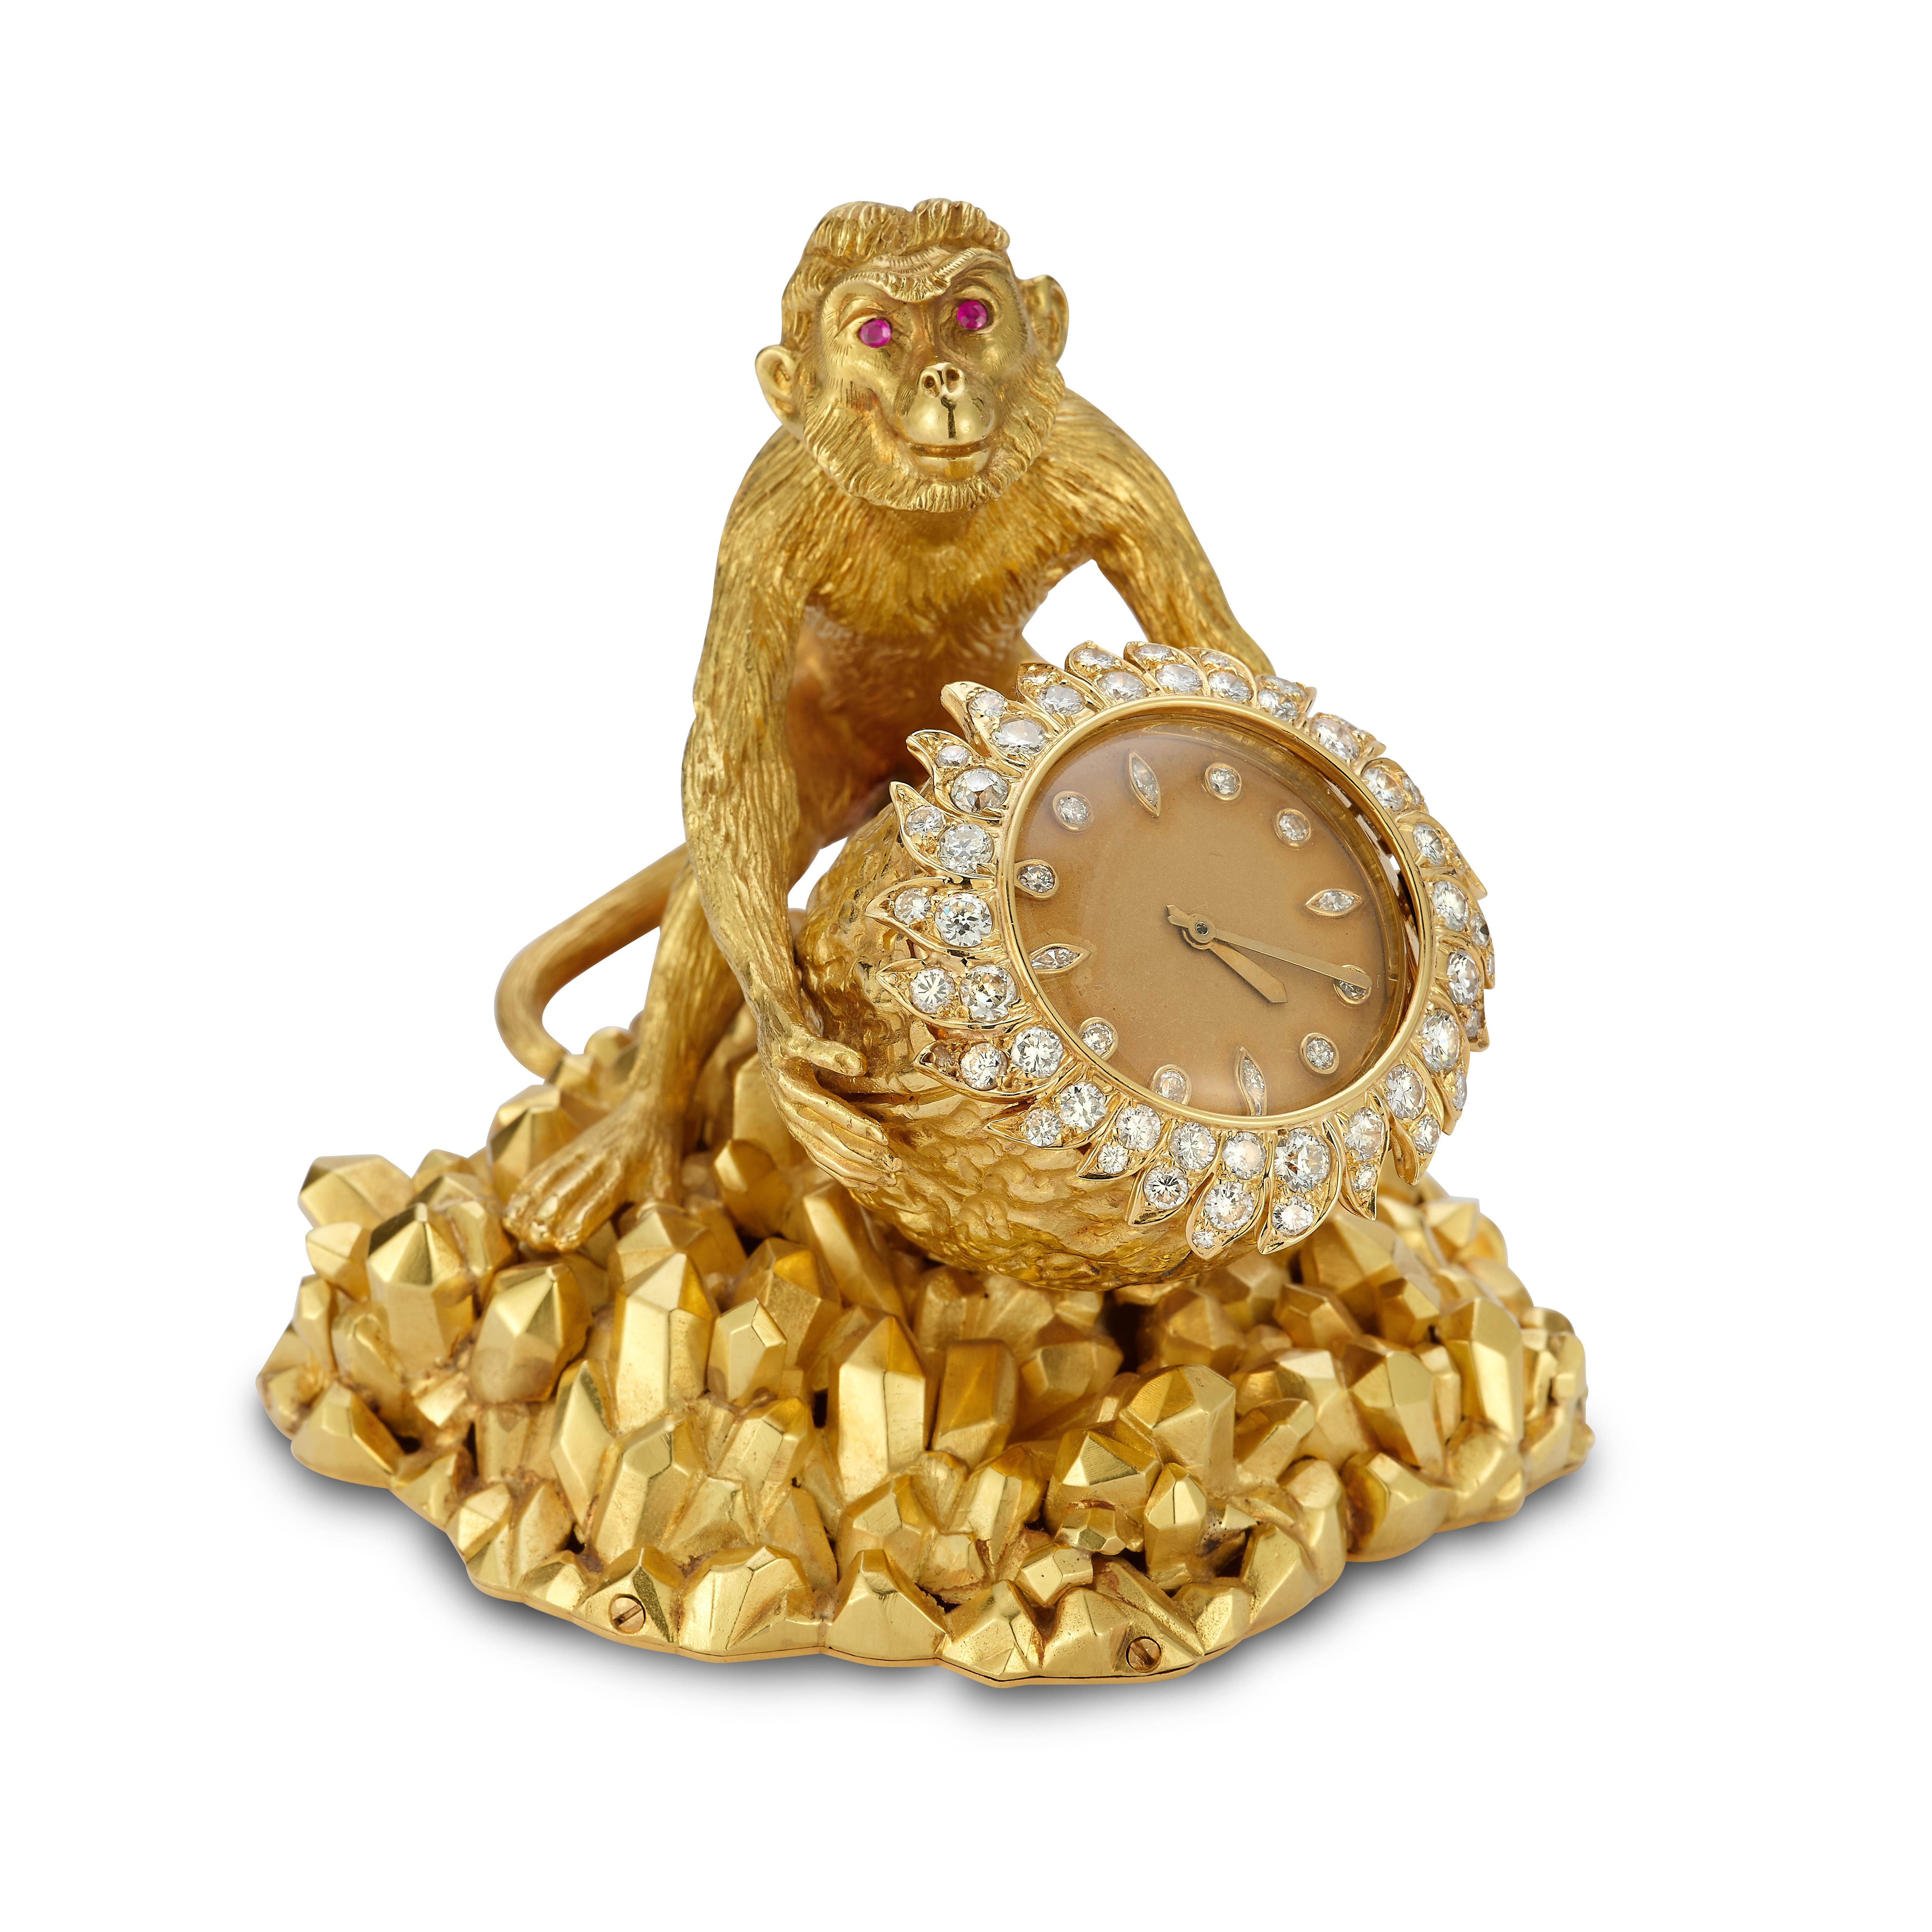 David Webb Monkey Desk Clock

An 18 karat yellow gold desk clock designed in the shape of a walnut, adorned with round and marquise cut diamonds. The clock is held by a monkey with round cut ruby eyes. The total weight of the diamonds is